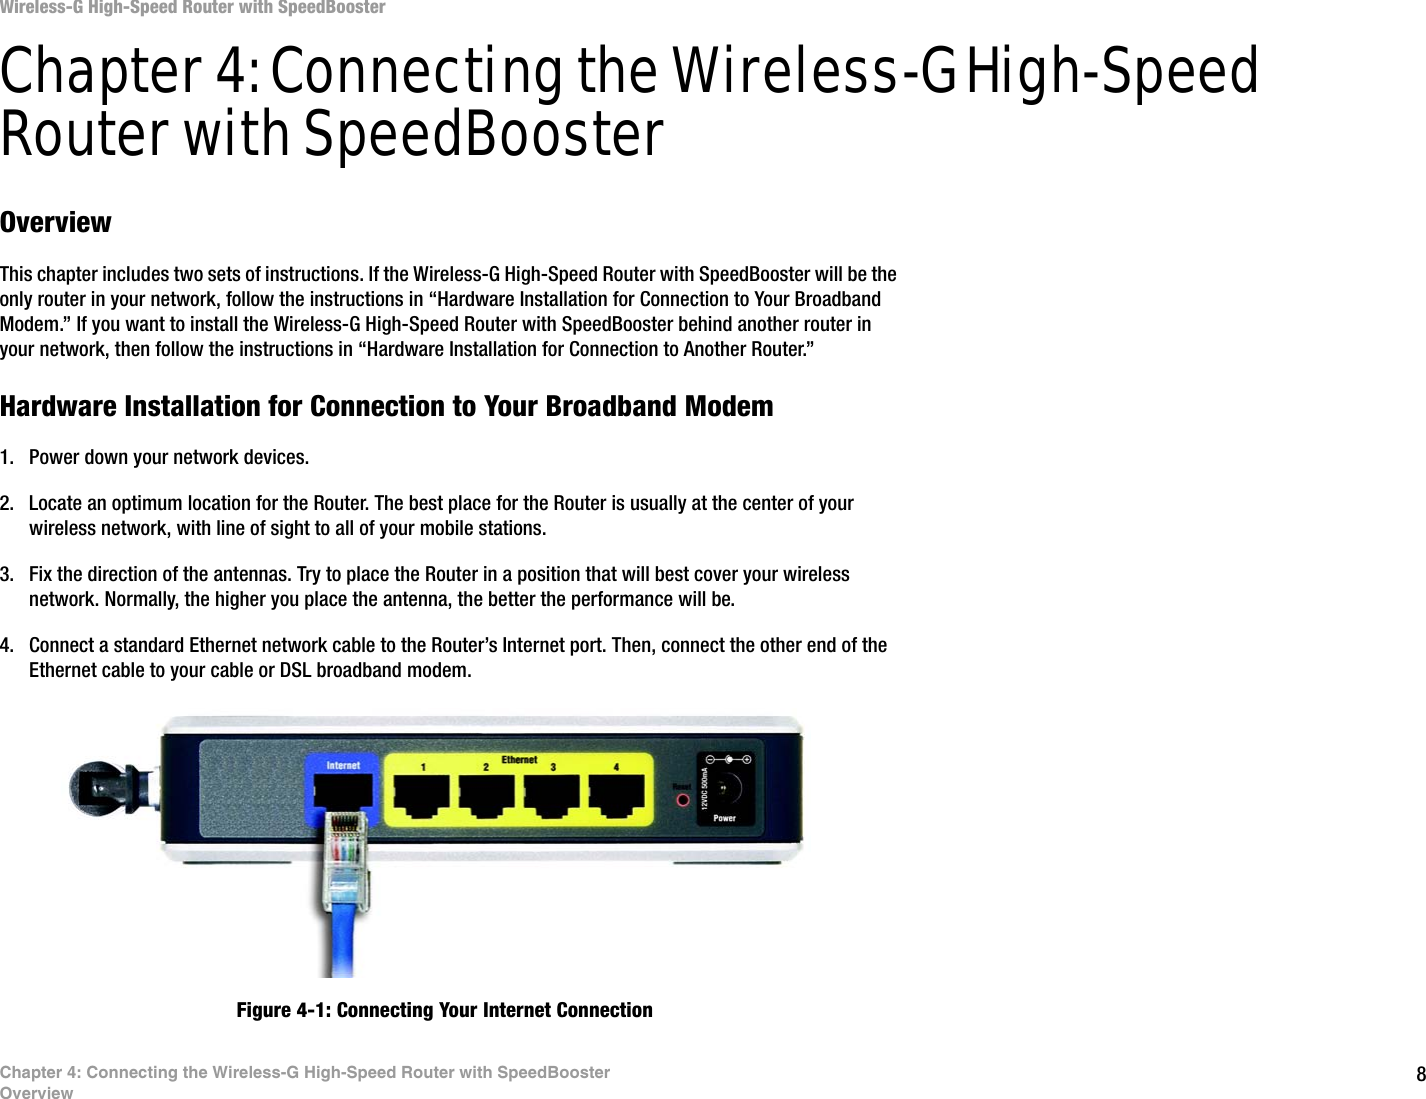 8Chapter 4: Connecting the Wireless-G High-Speed Router with SpeedBoosterOverviewWireless-G High-Speed Router with SpeedBoosterChapter 4: Connecting the Wireless-G High-Speed Router with SpeedBoosterOverviewThis chapter includes two sets of instructions. If the Wireless-G High-Speed Router with SpeedBooster will be the only router in your network, follow the instructions in “Hardware Installation for Connection to Your Broadband Modem.” If you want to install the Wireless-G High-Speed Router with SpeedBooster behind another router in your network, then follow the instructions in “Hardware Installation for Connection to Another Router.”Hardware Installation for Connection to Your Broadband Modem1. Power down your network devices.2. Locate an optimum location for the Router. The best place for the Router is usually at the center of your wireless network, with line of sight to all of your mobile stations.3. Fix the direction of the antennas. Try to place the Router in a position that will best cover your wireless network. Normally, the higher you place the antenna, the better the performance will be.4. Connect a standard Ethernet network cable to the Router’s Internet port. Then, connect the other end of the Ethernet cable to your cable or DSL broadband modem.Figure 4-1: Connecting Your Internet Connection